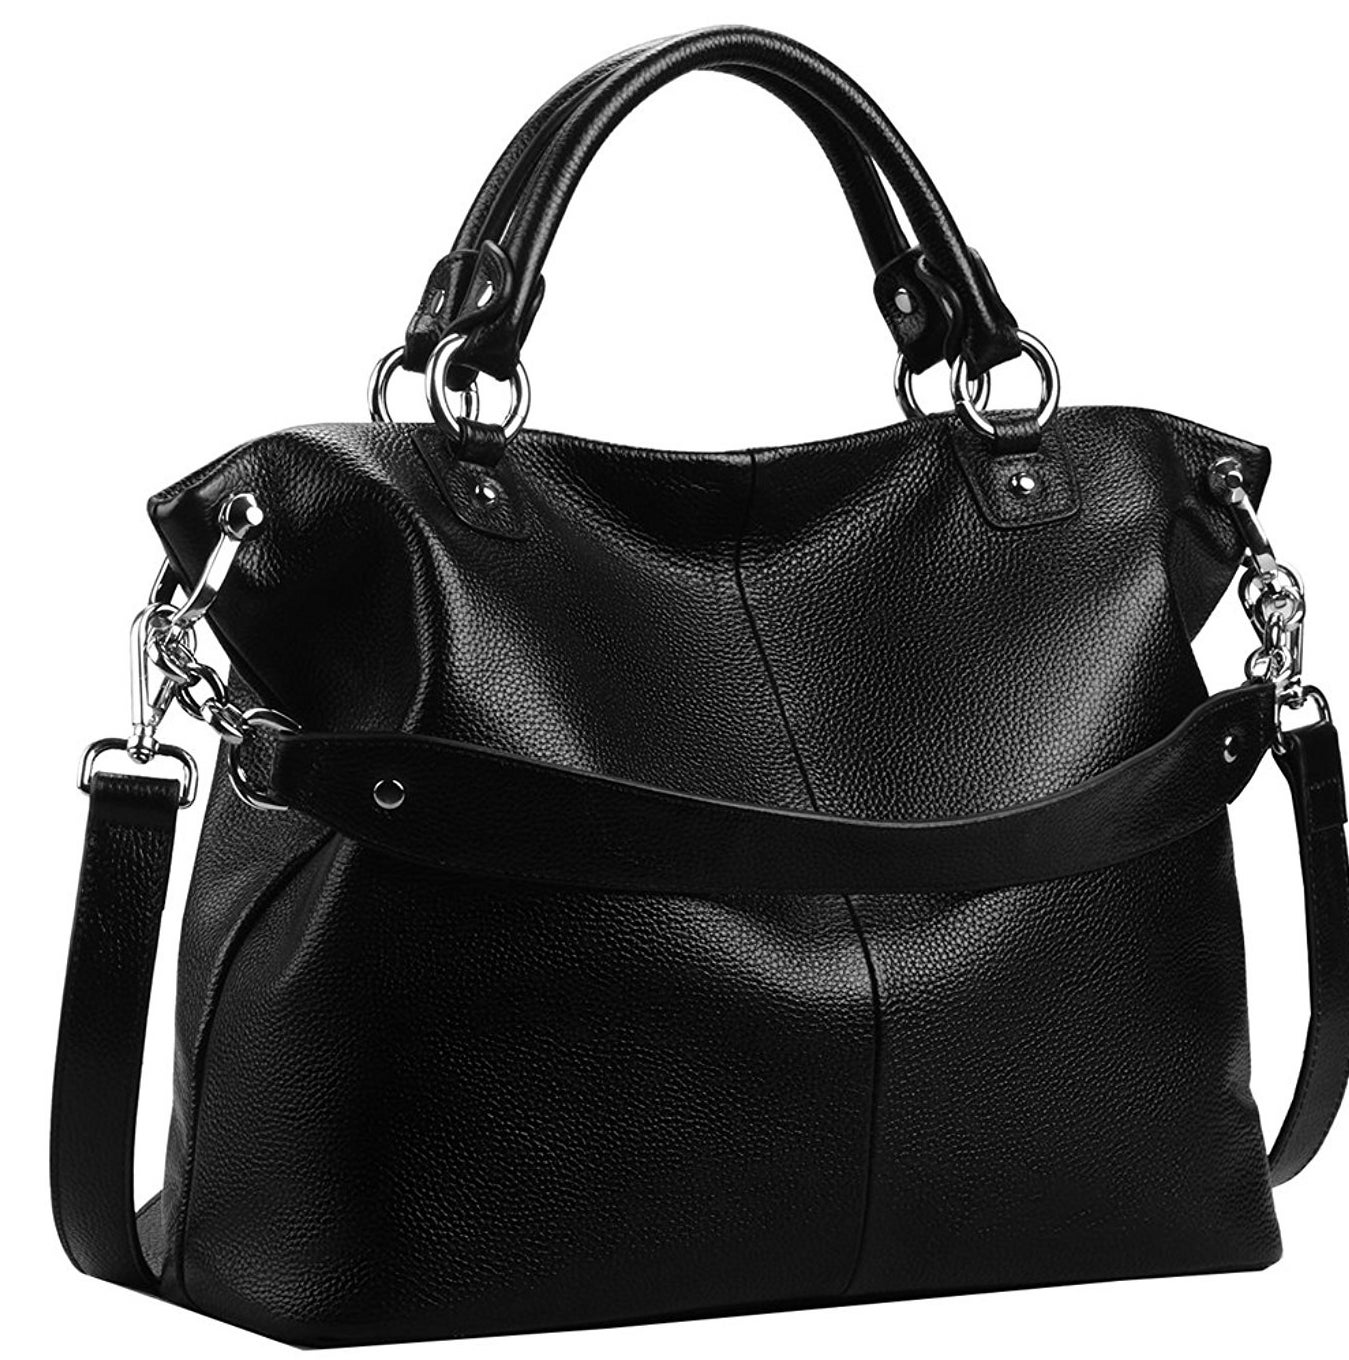 34 Of The Best Leather Bags You Can Get On Amazon